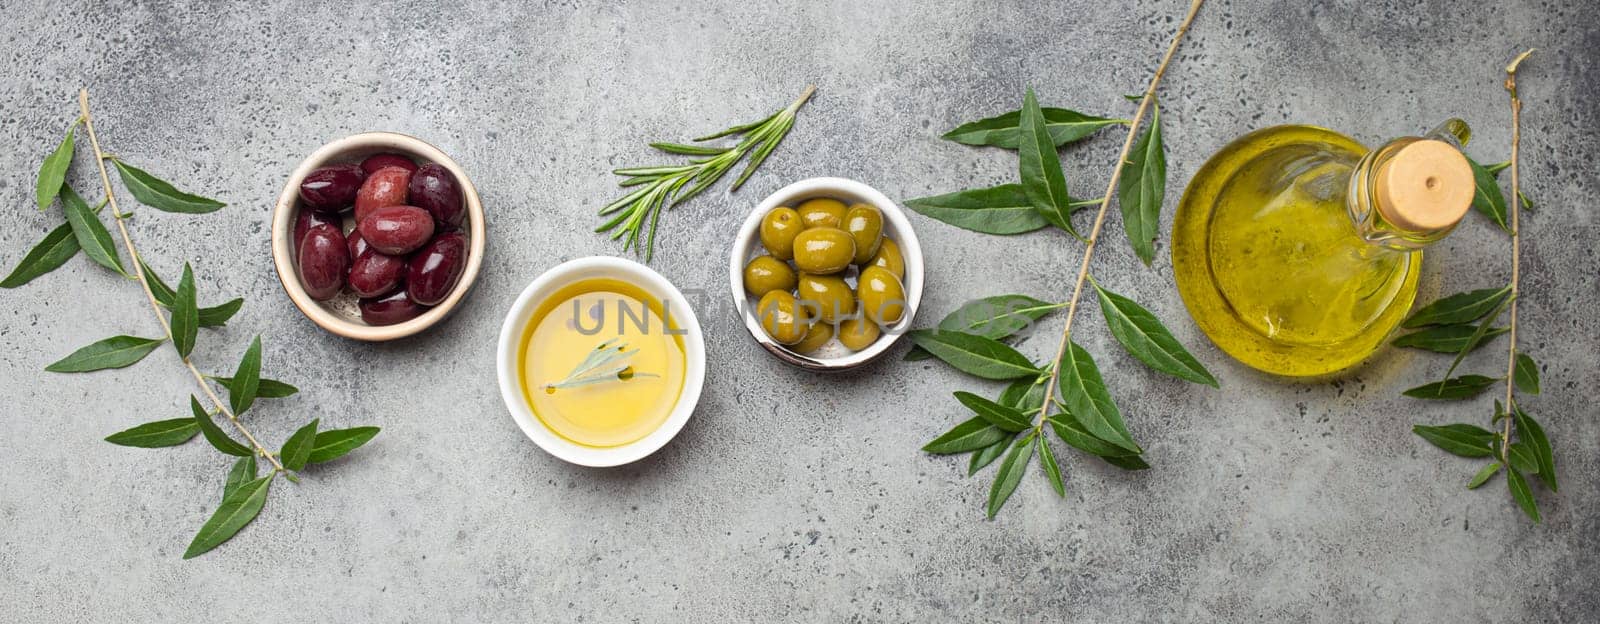 Composition with green and brown olives, extra virgin olive oil in glass bottle, olive tree branches on gray concrete stone rustic background top view by its_al_dente